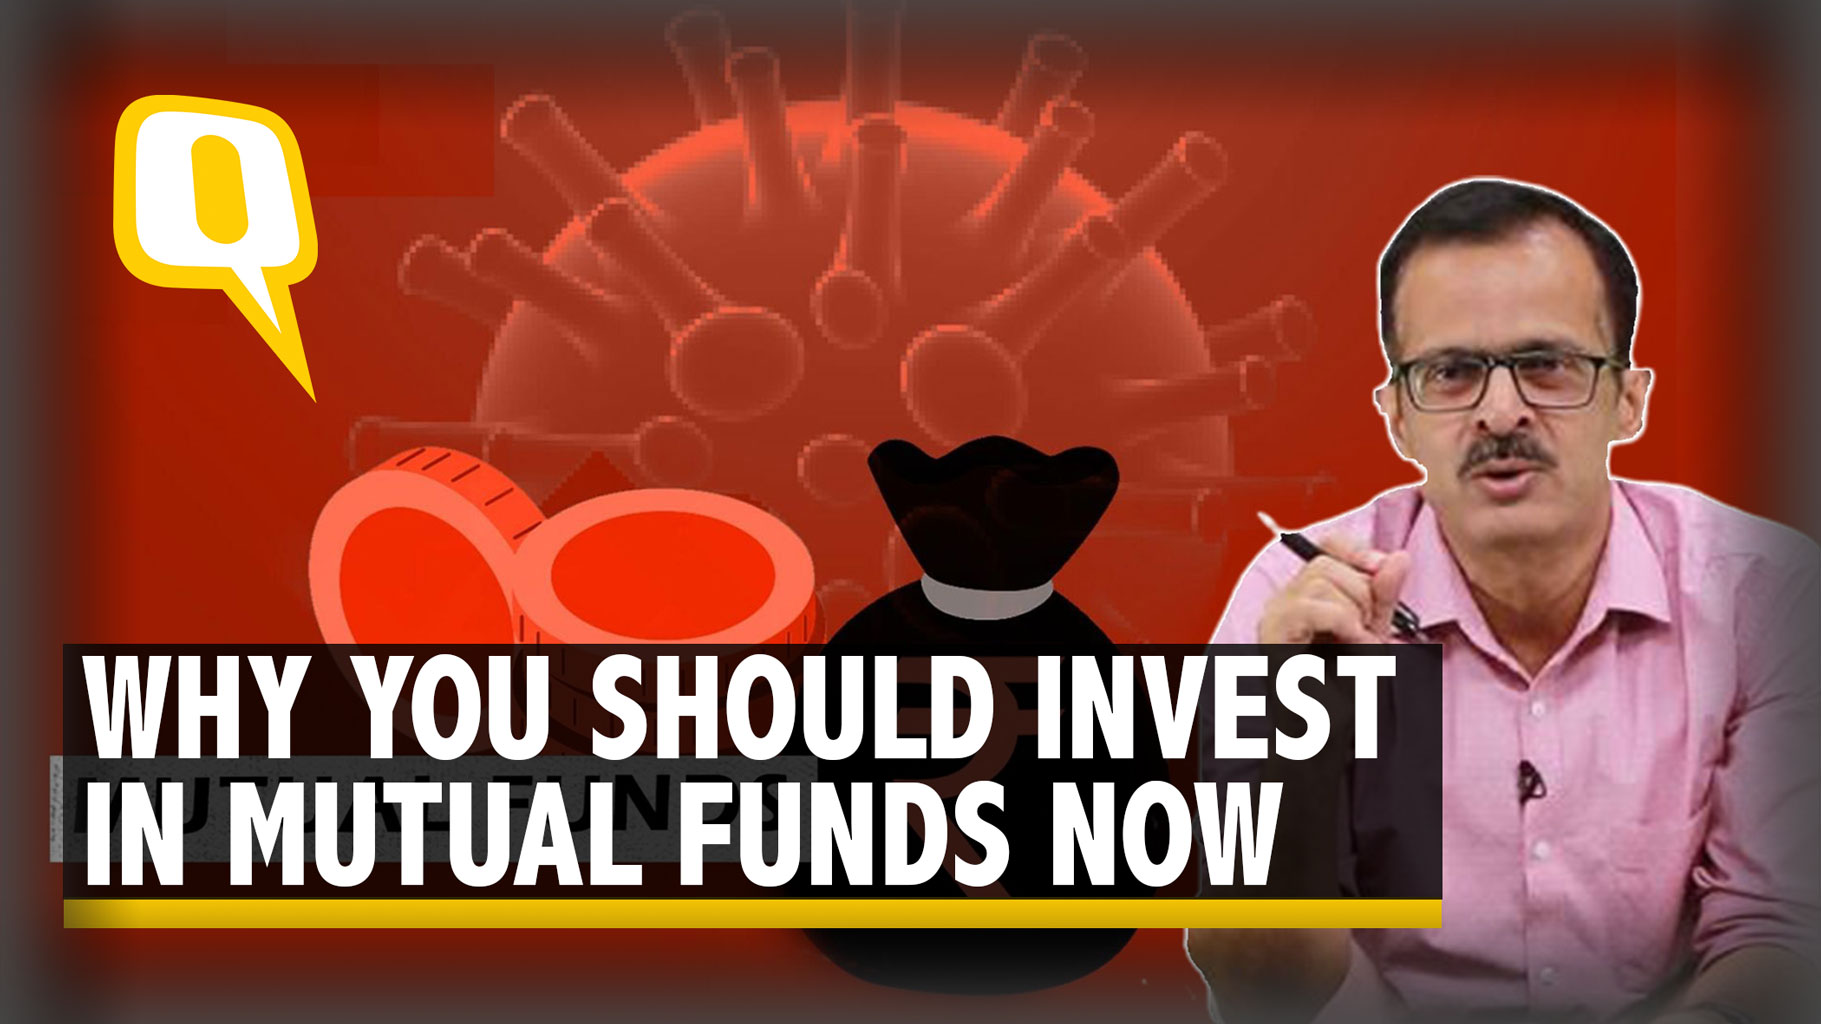 FAQ: Why Now is a Good Time to Invest in Mutual Funds